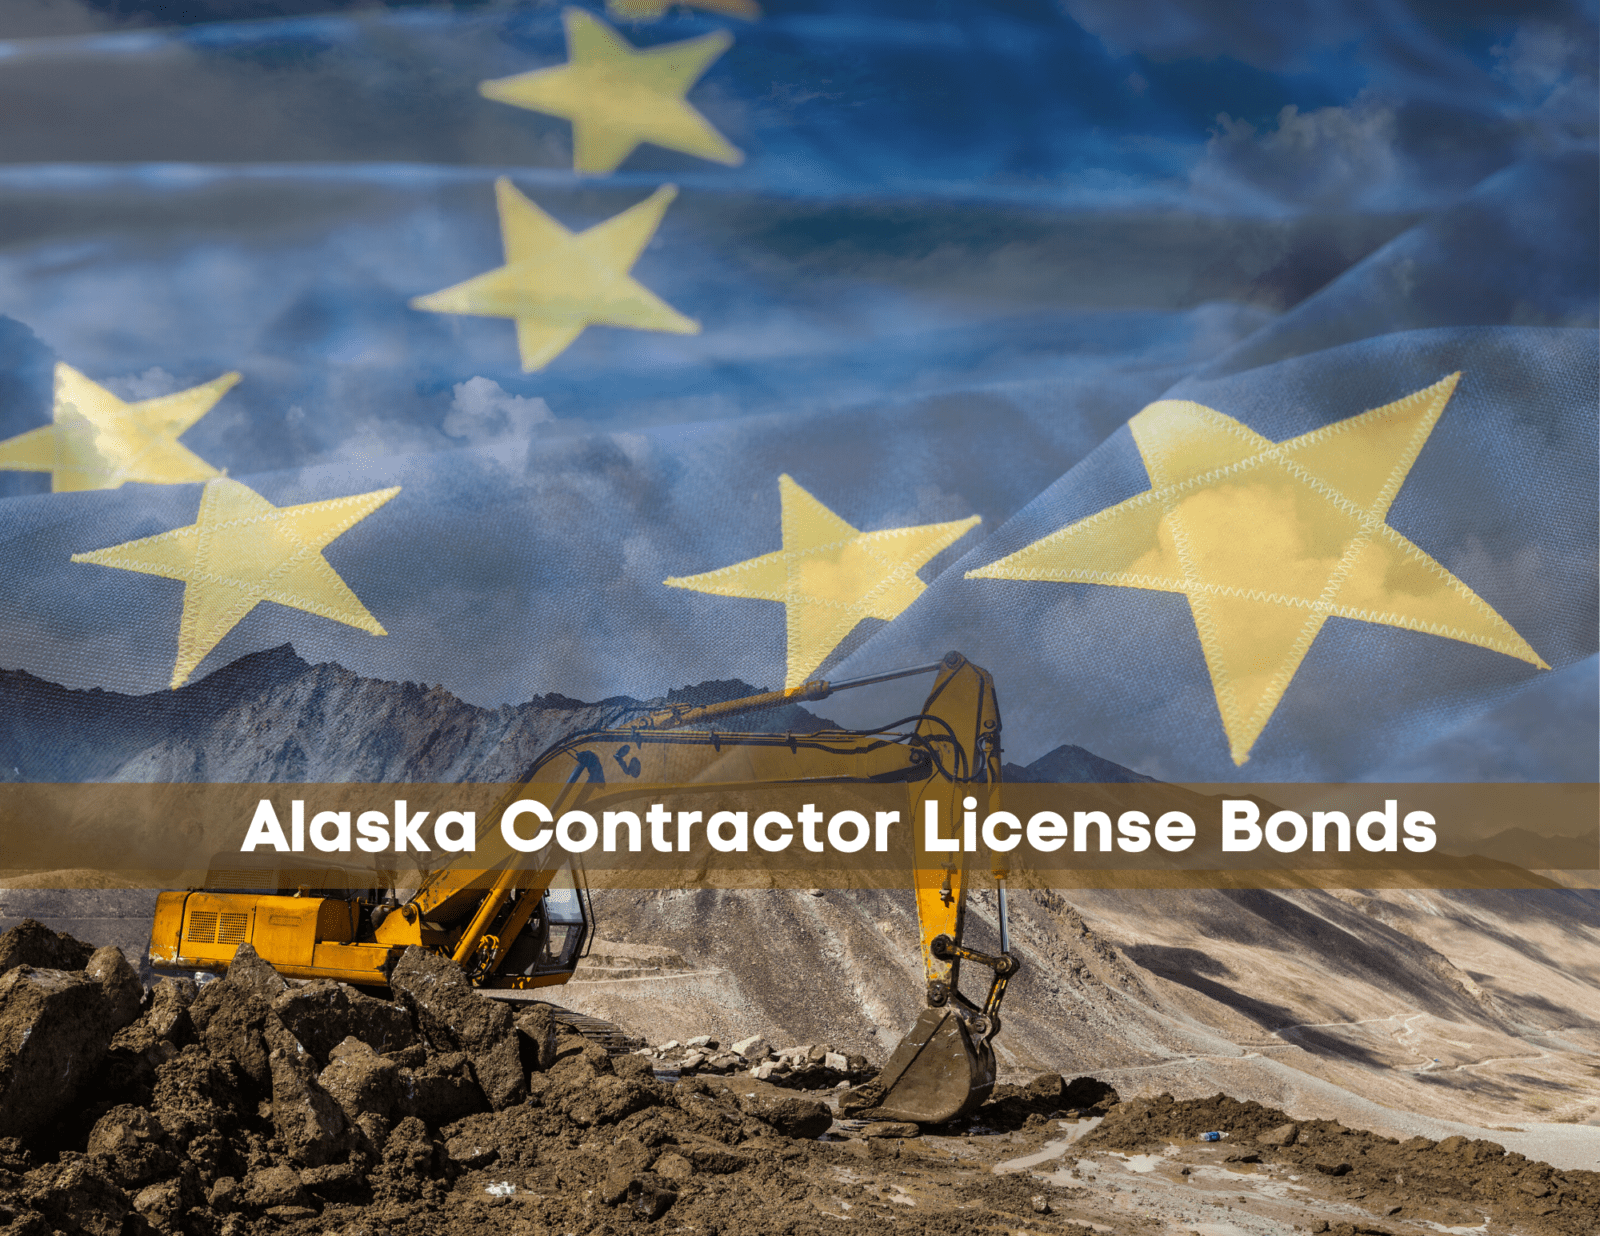 Alaska Contractor License Bonds - Picture of an excavator with a transparent Alaskan flag over it